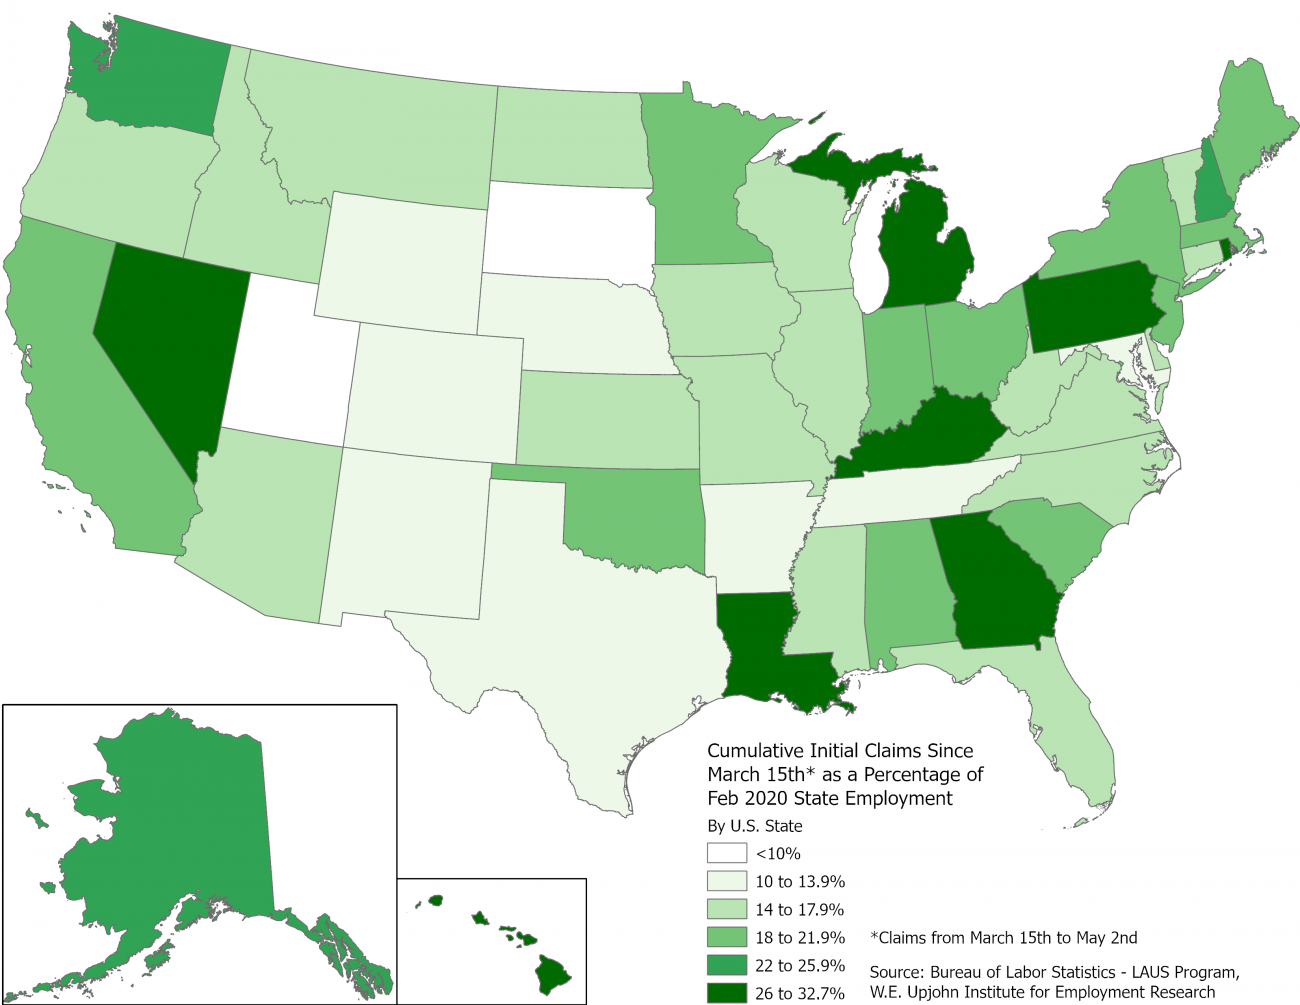 National map of state initial UI claims ratios